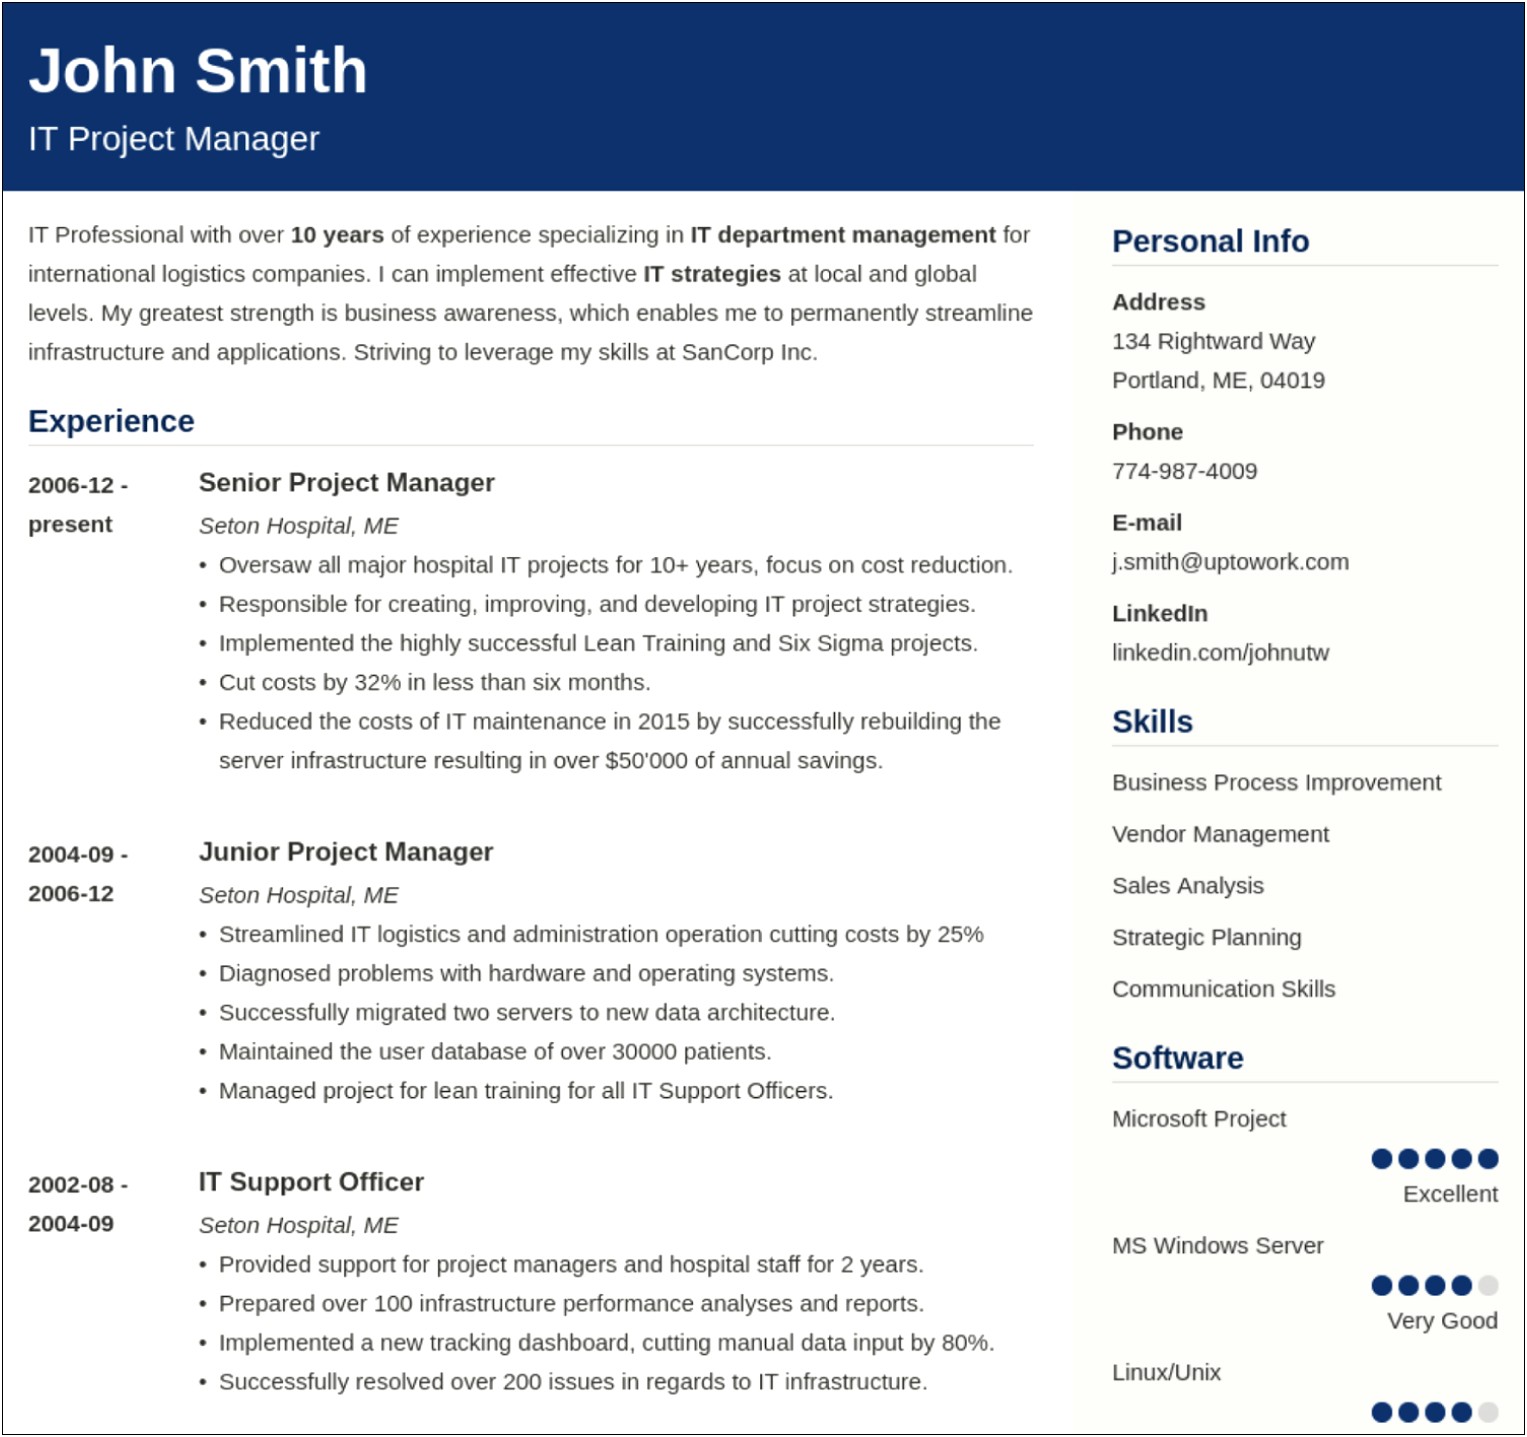 Resume Sample Hired By Big 4